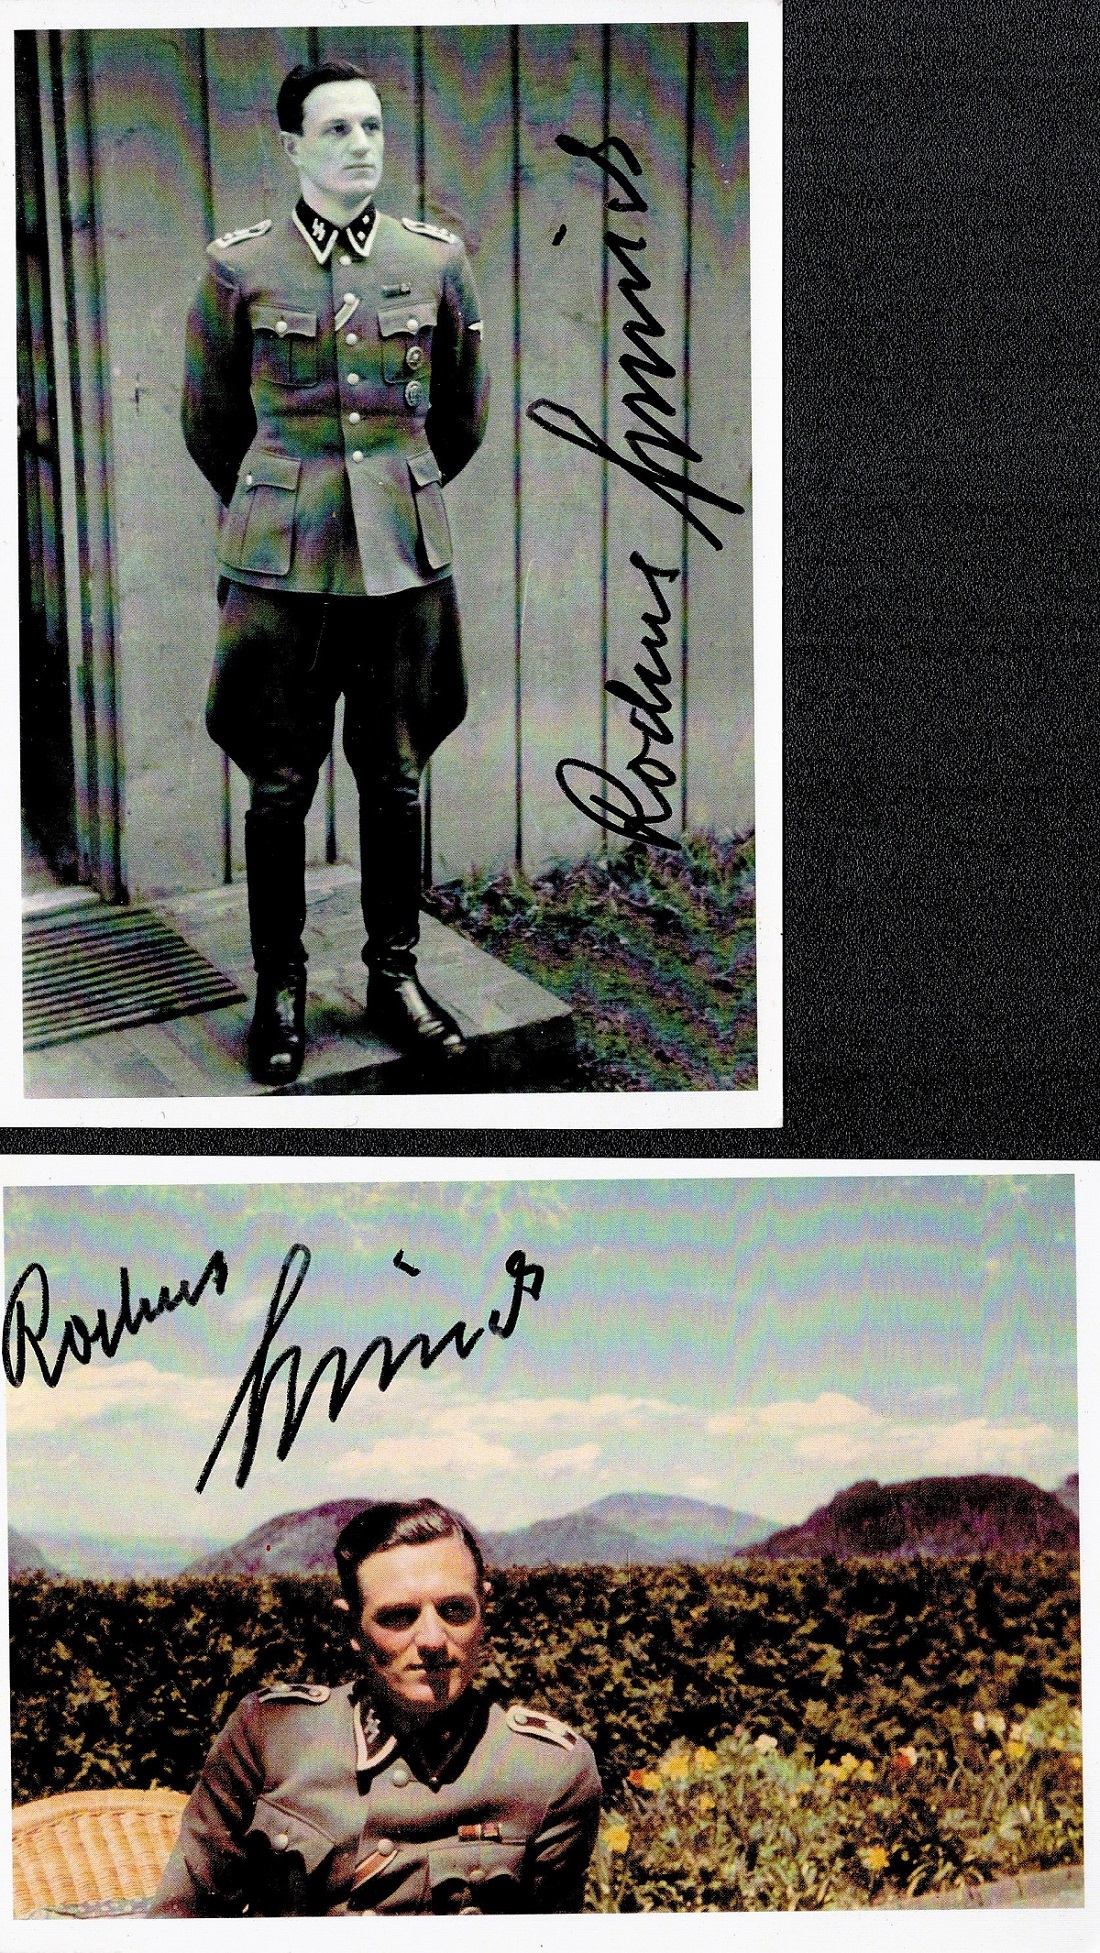 WWII, Rochus Misch set of 2 signed 6x4 photographs. Both photographs are in great condition and